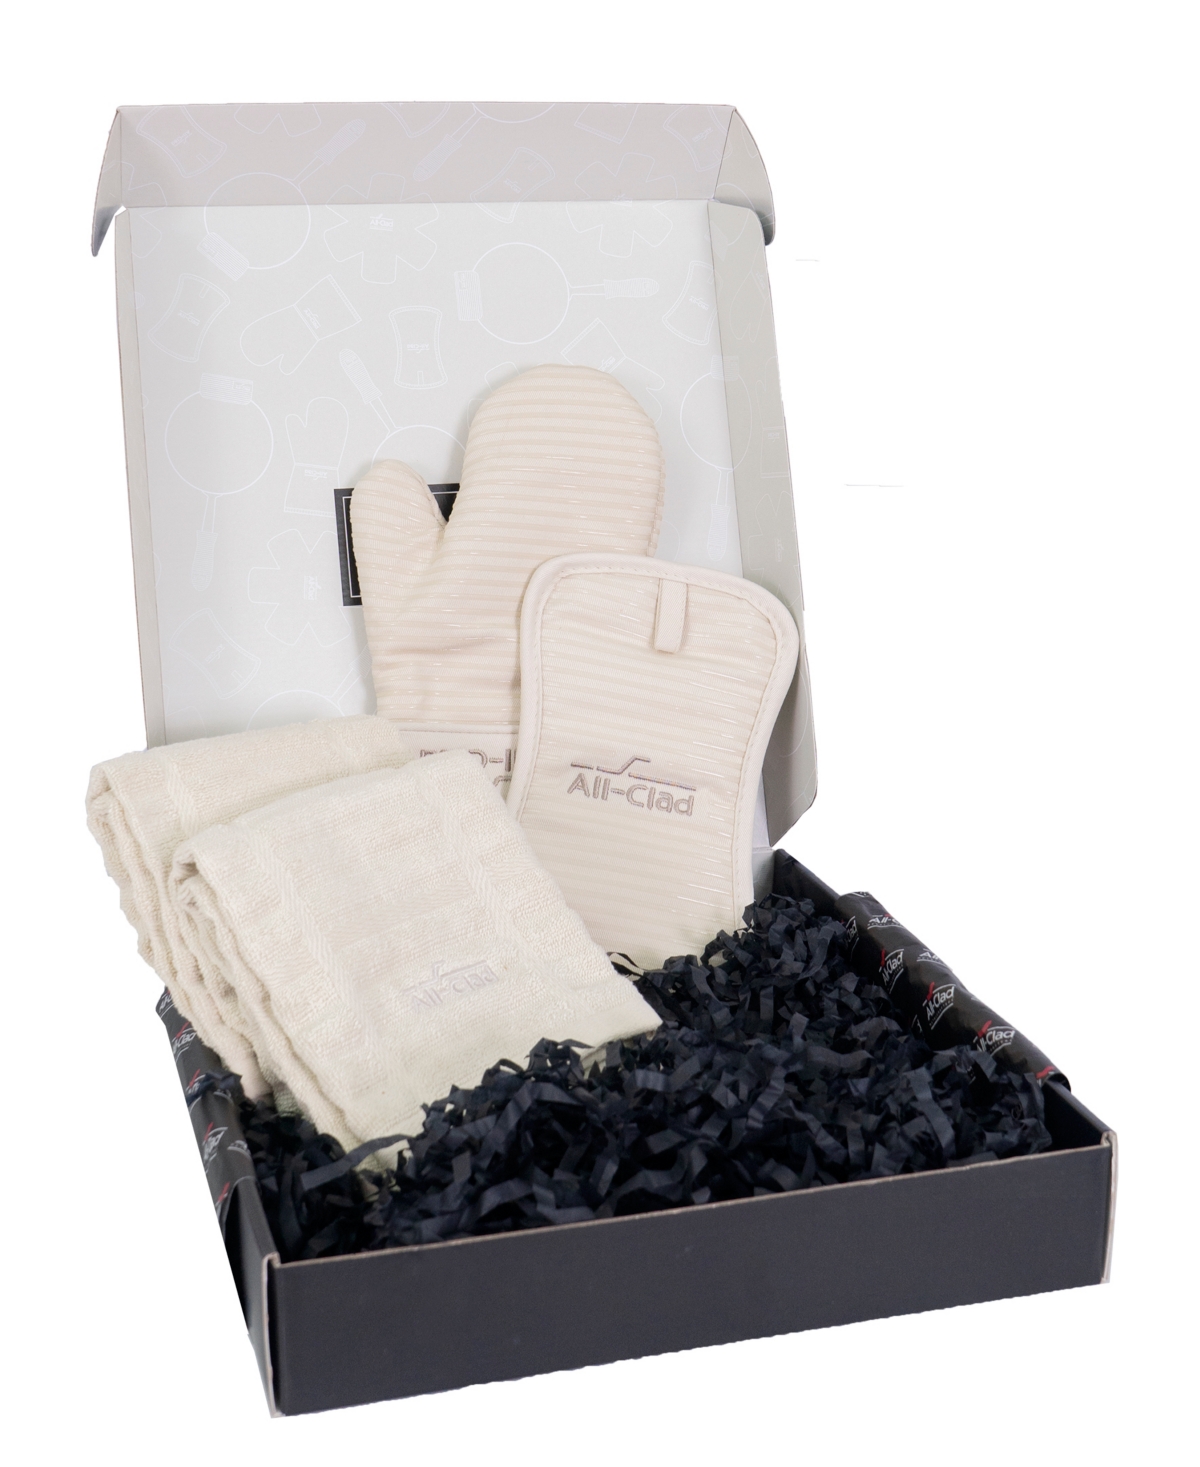 All-clad Foundation Collection 4-piece Gift Set In Almond